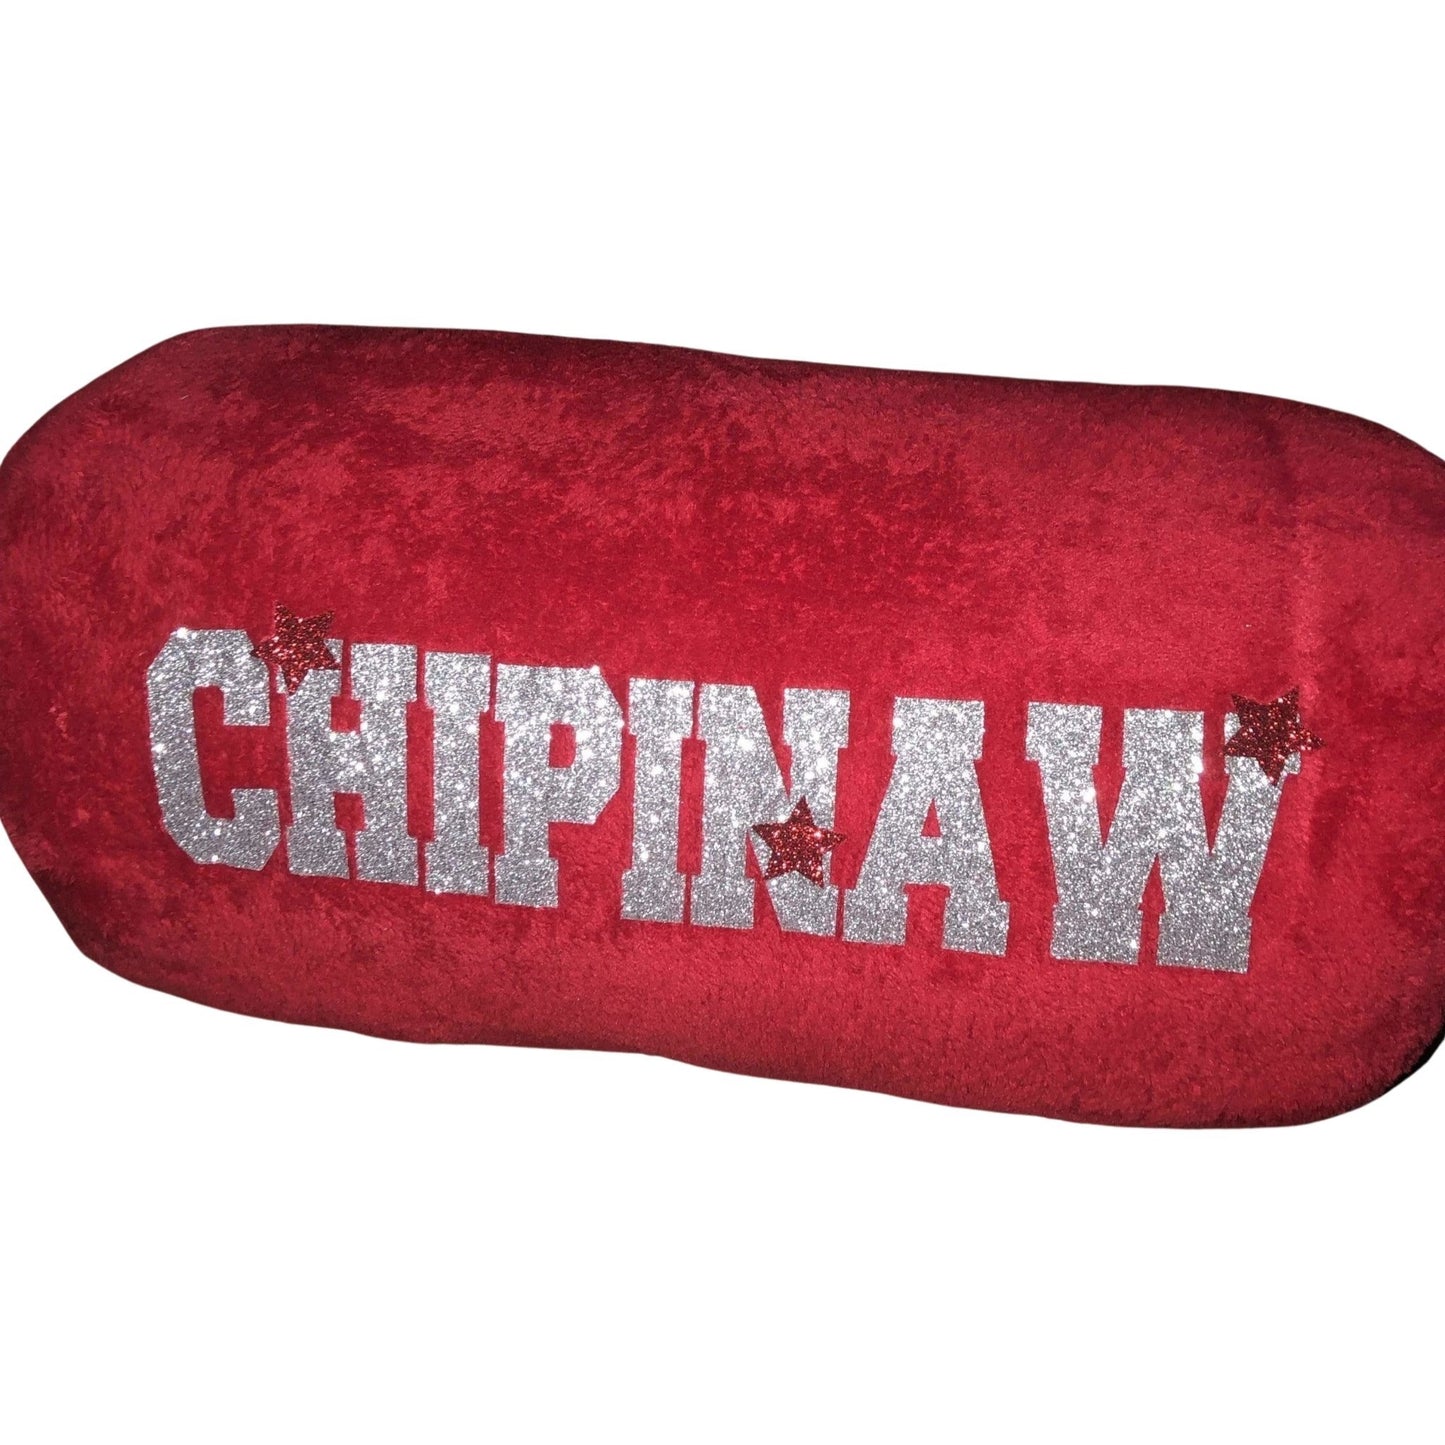 Personalized Bolster Pillows - a Spirit Animal -